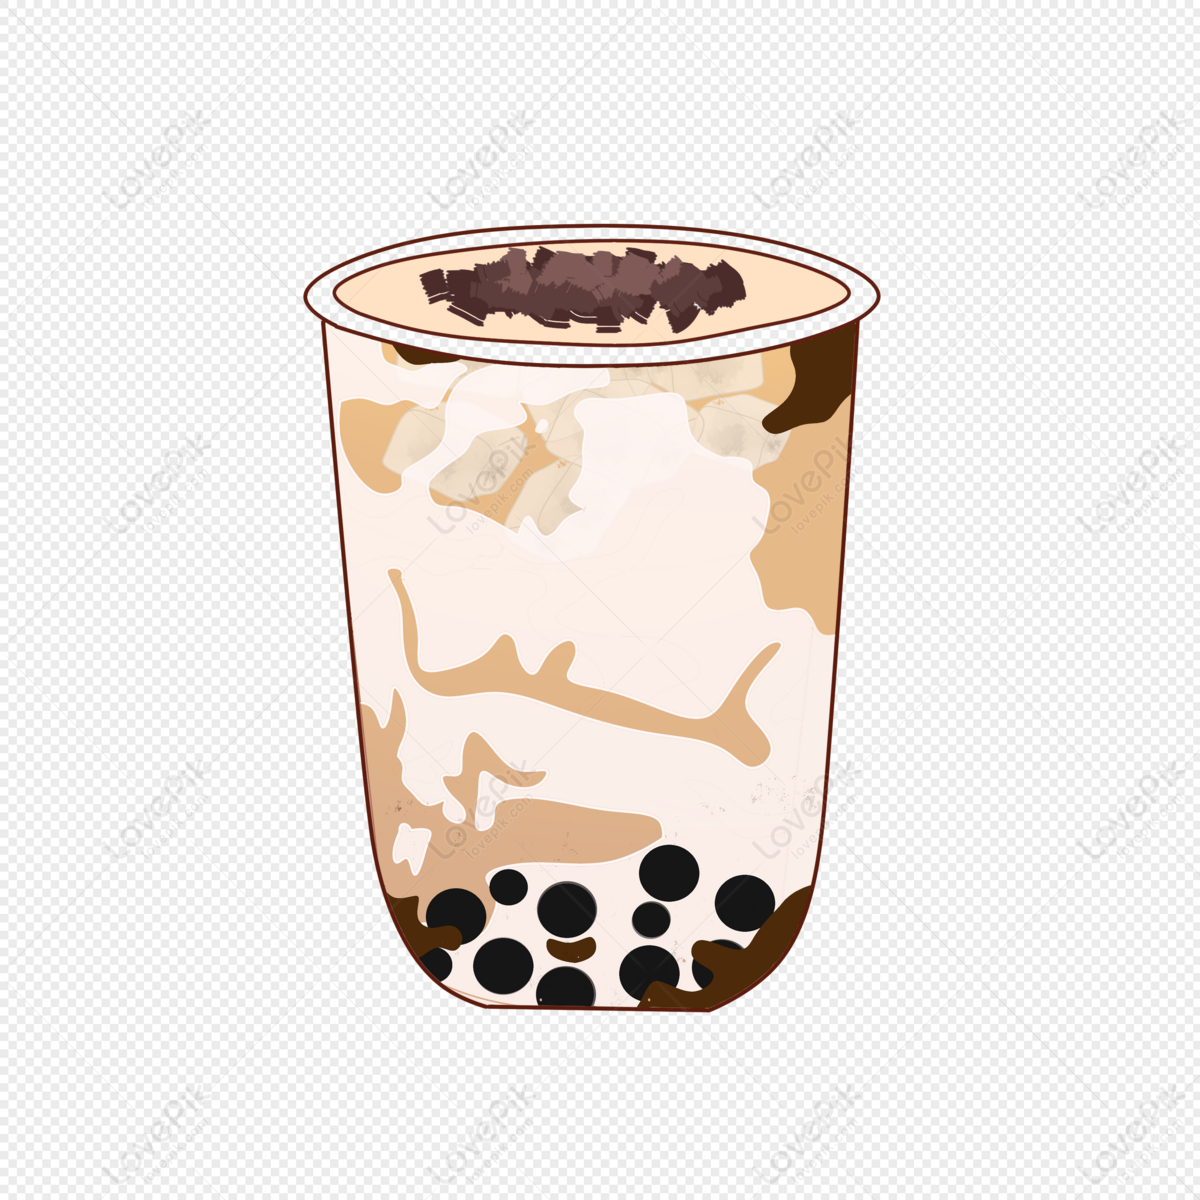 https://img.lovepik.com/free-png/20210923/lovepik-have-a-cup-of-oreo-milk-tea-in-summer-png-image_401246793_wh1200.png